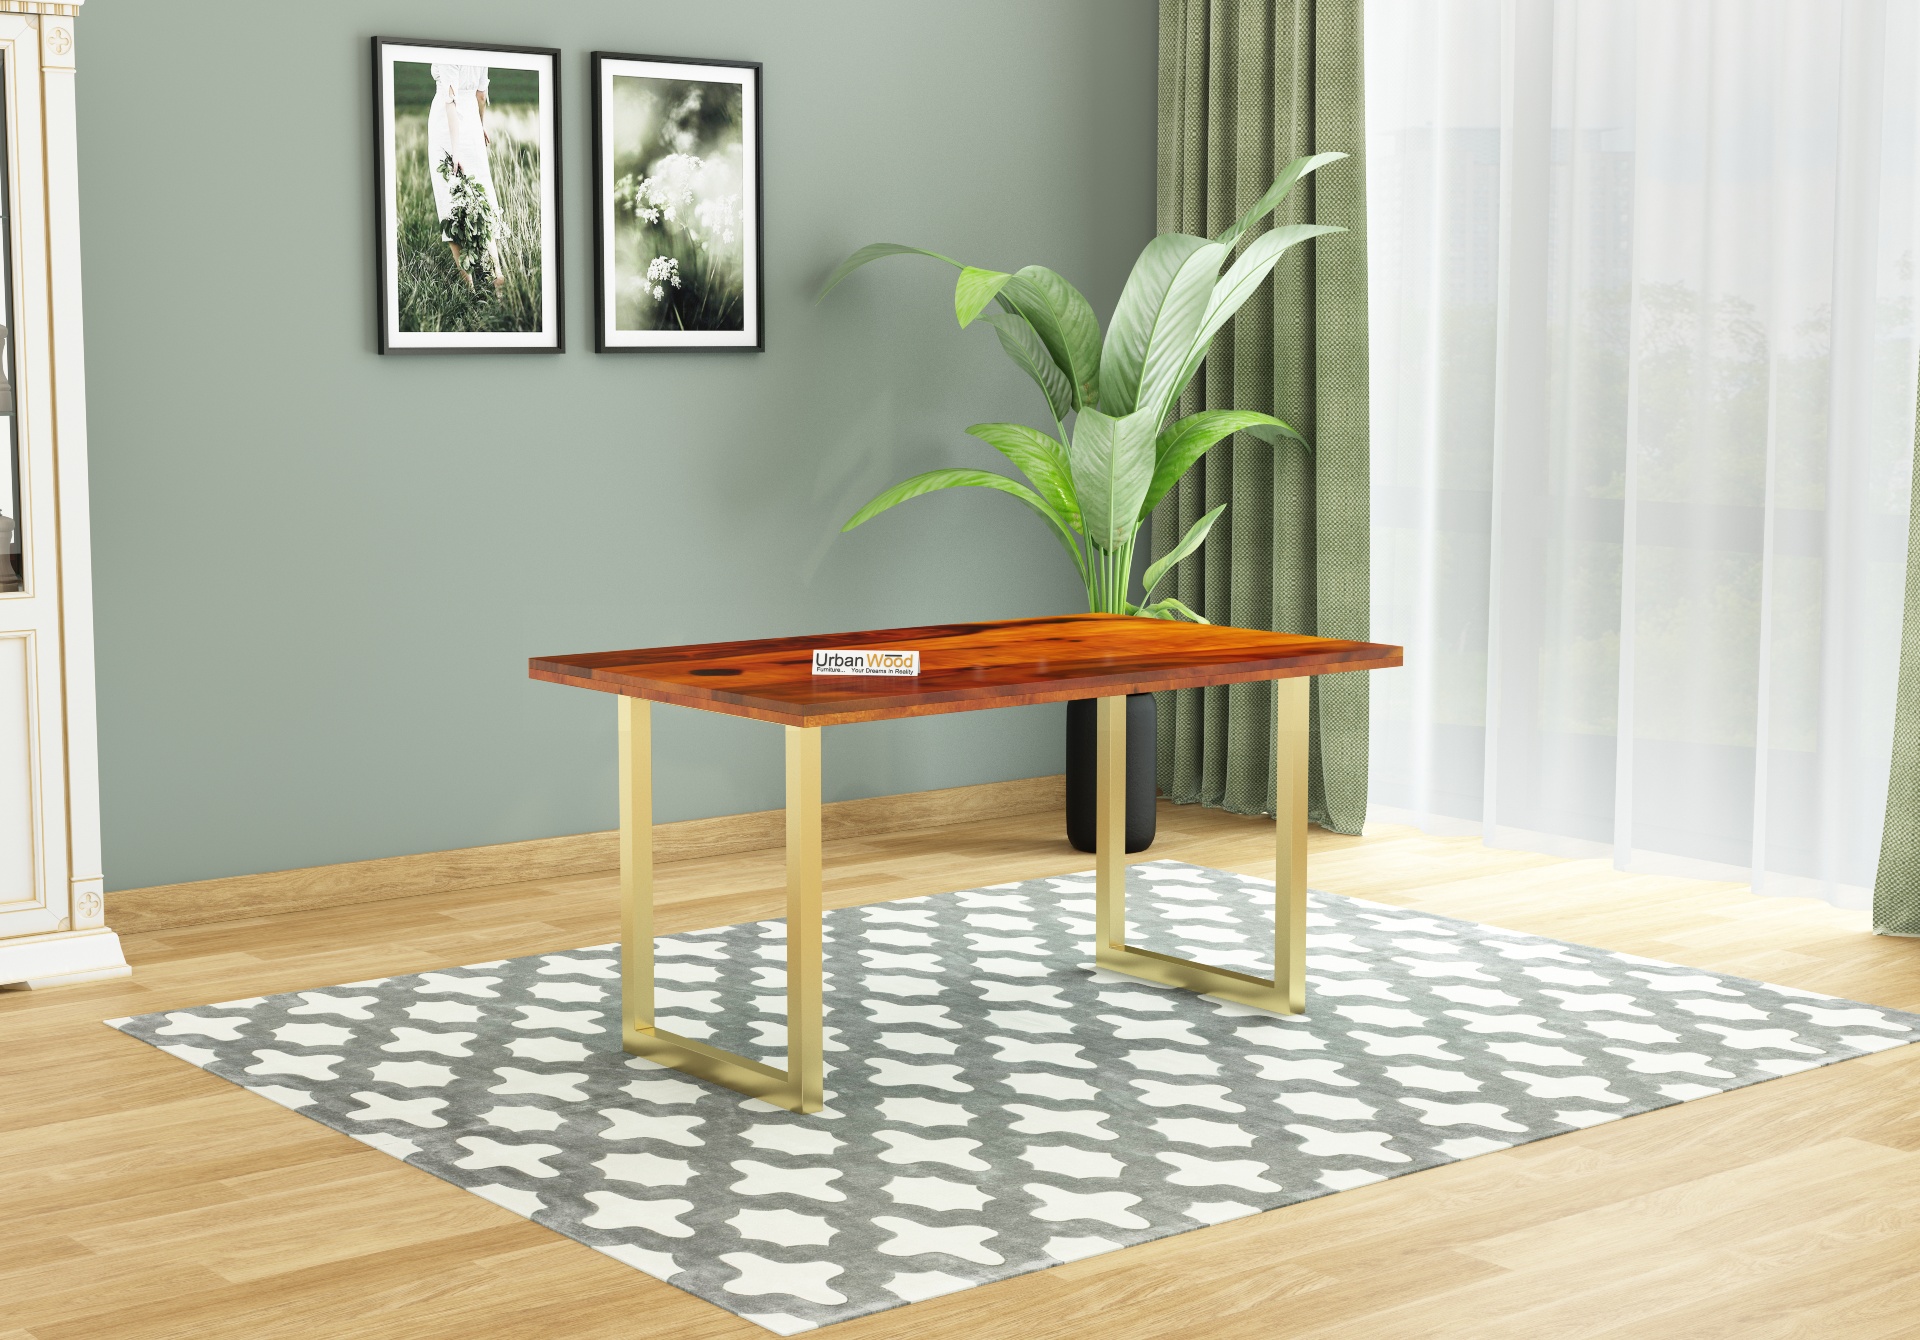 Tale 4-Seater Dining Table ( Honey Finish )